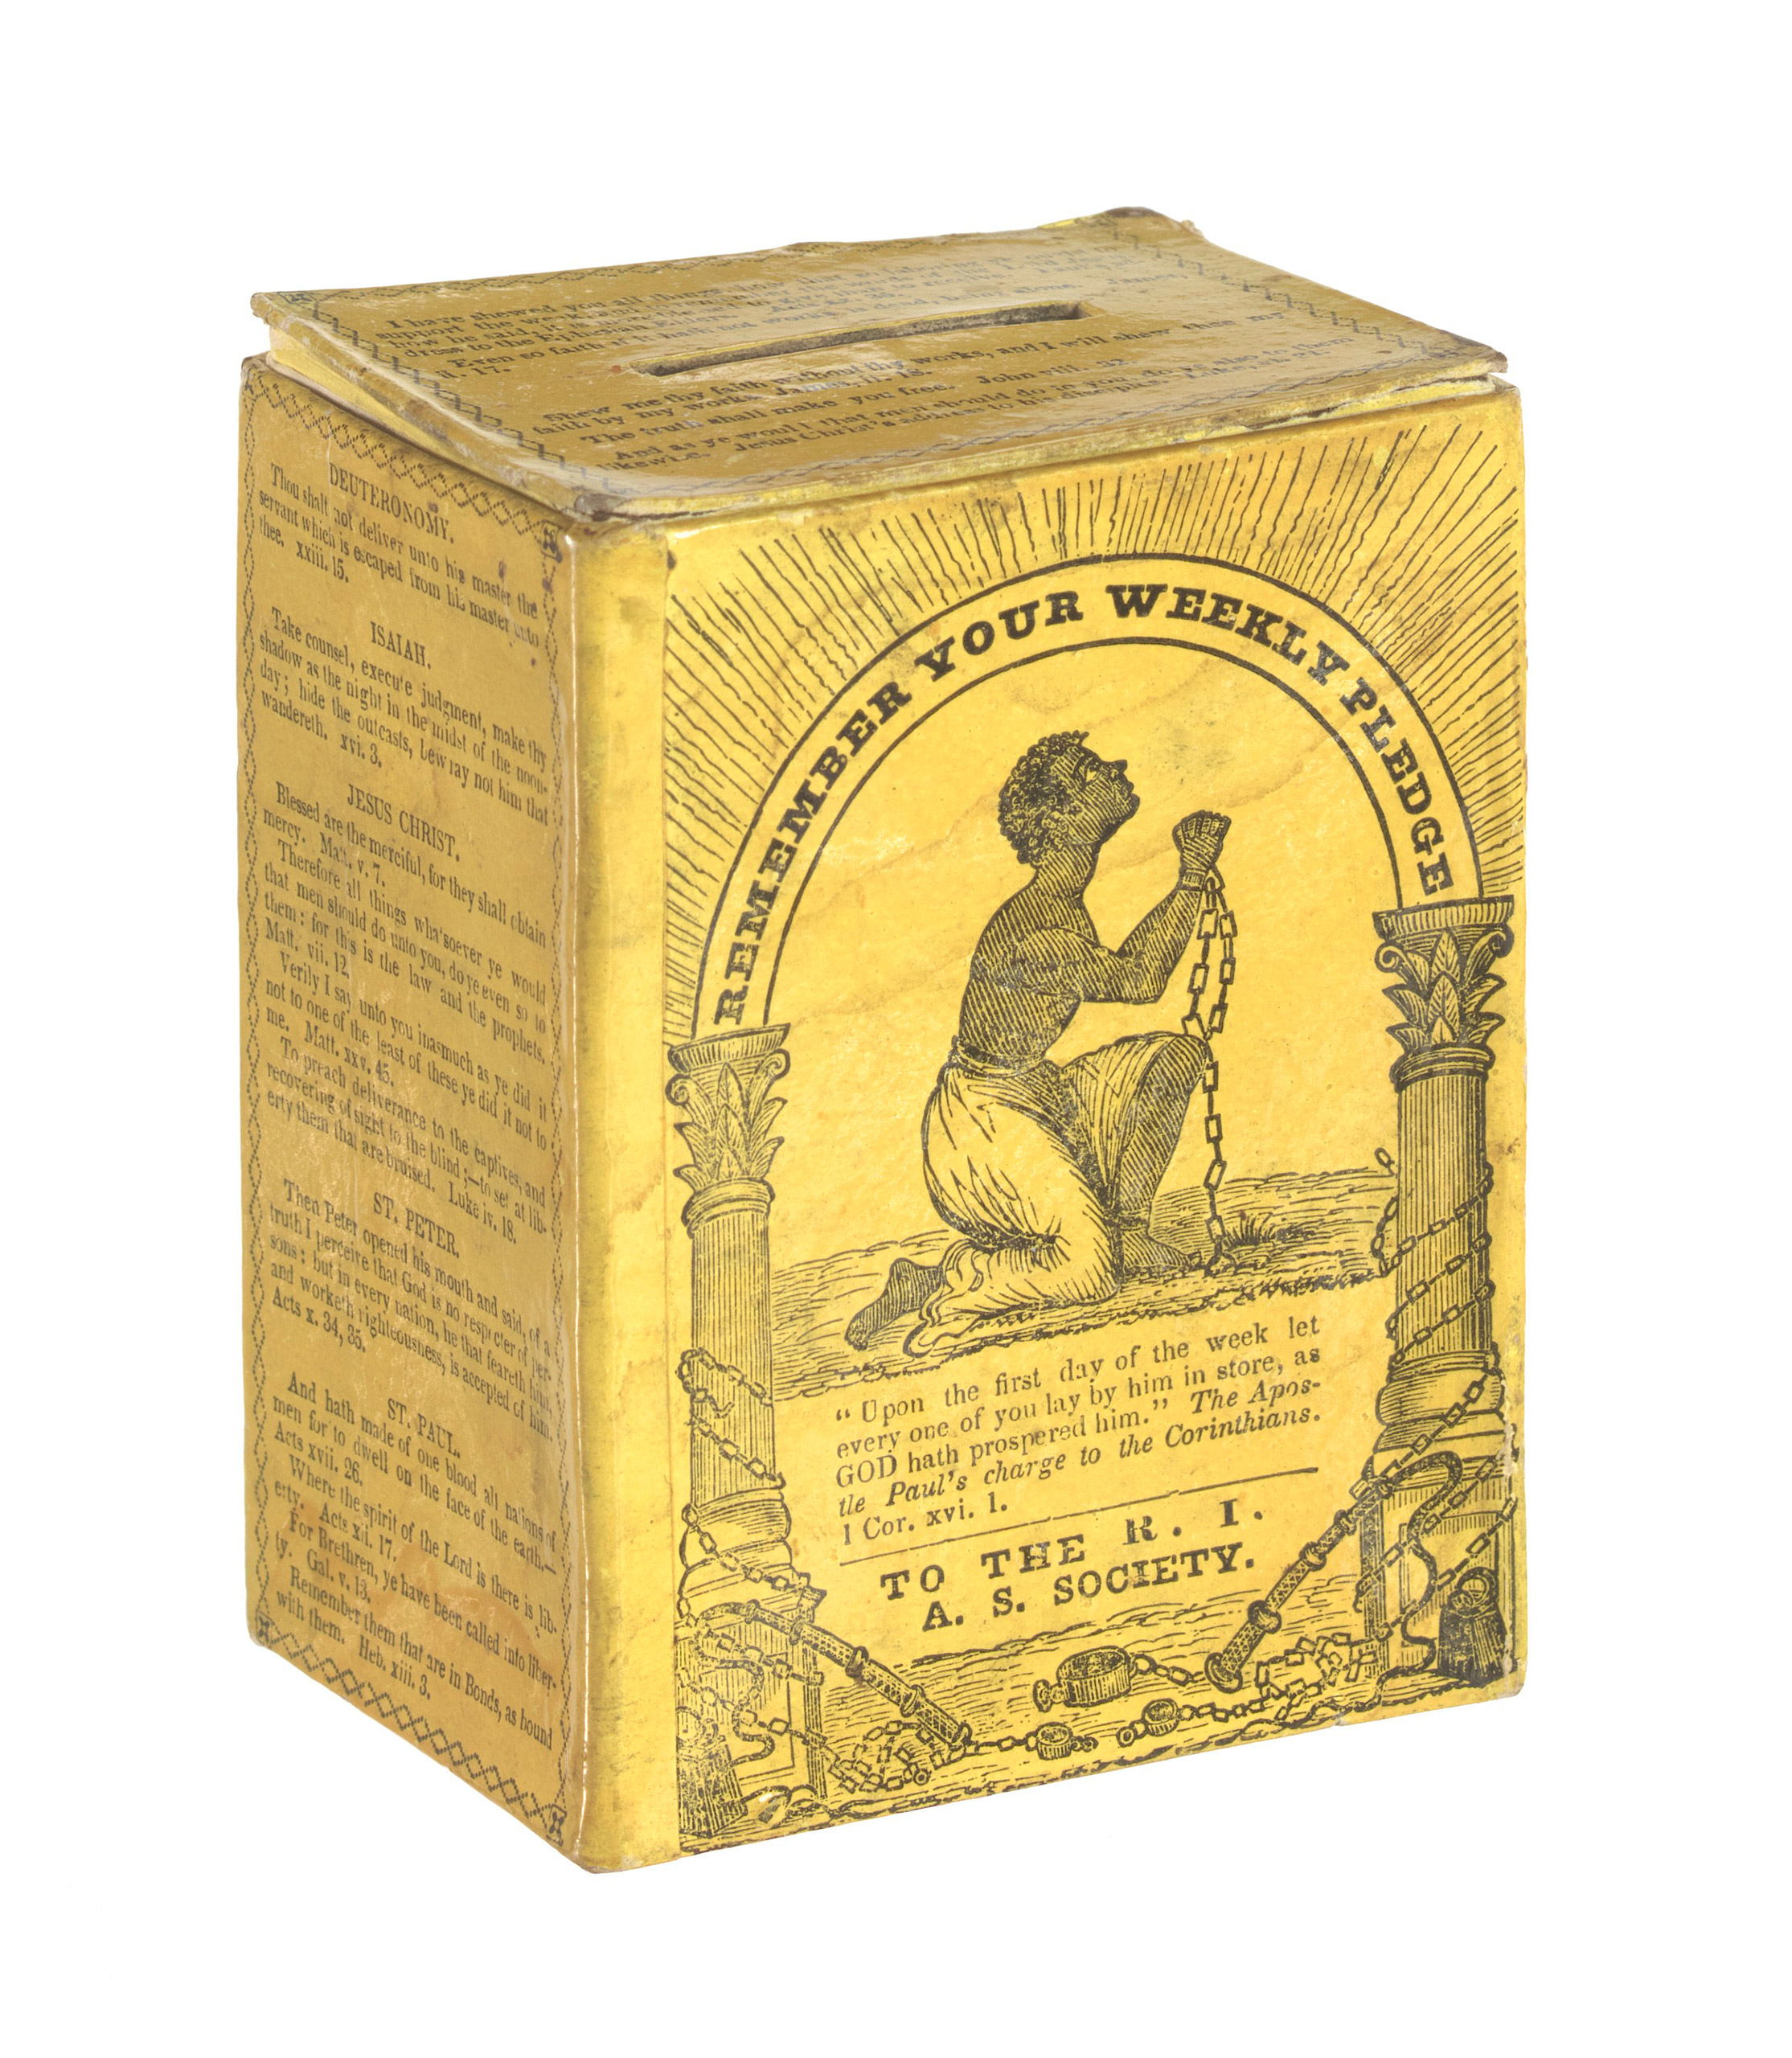 Collection box of the Rhode Island Anti-Slavery Society, owned by Garrison family, ca. 1830s - 1850s.